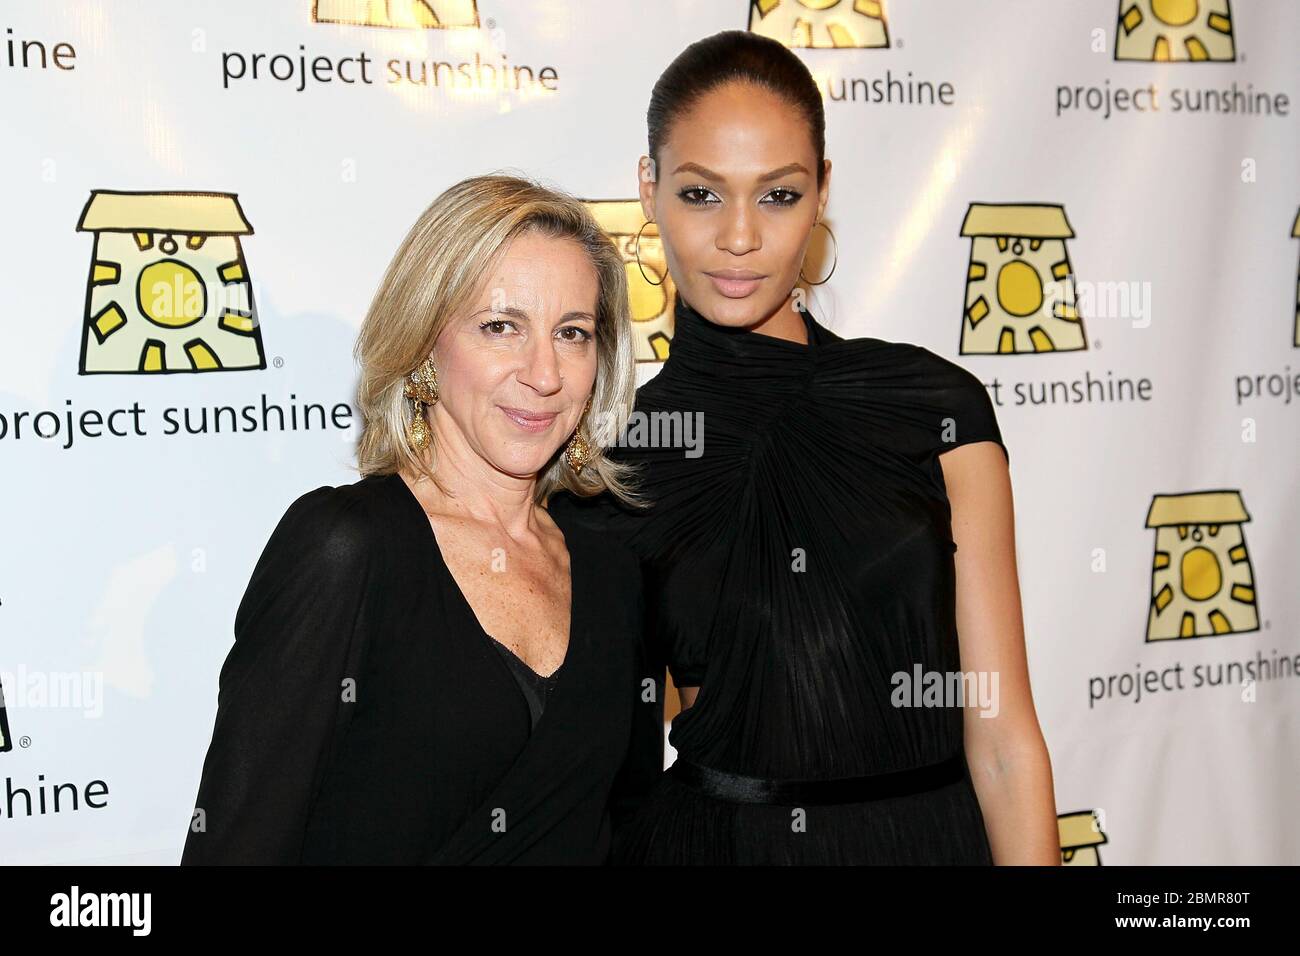 New York, NY, USA. 17 May, 2011. Editor of People StyleWatch, Susan Kaufman, Joan Smalls at the 8th Annual Project Sunshine Benefit at Cipriani Wall Street. Credit: Steve Mack/Alamy Stock Photo